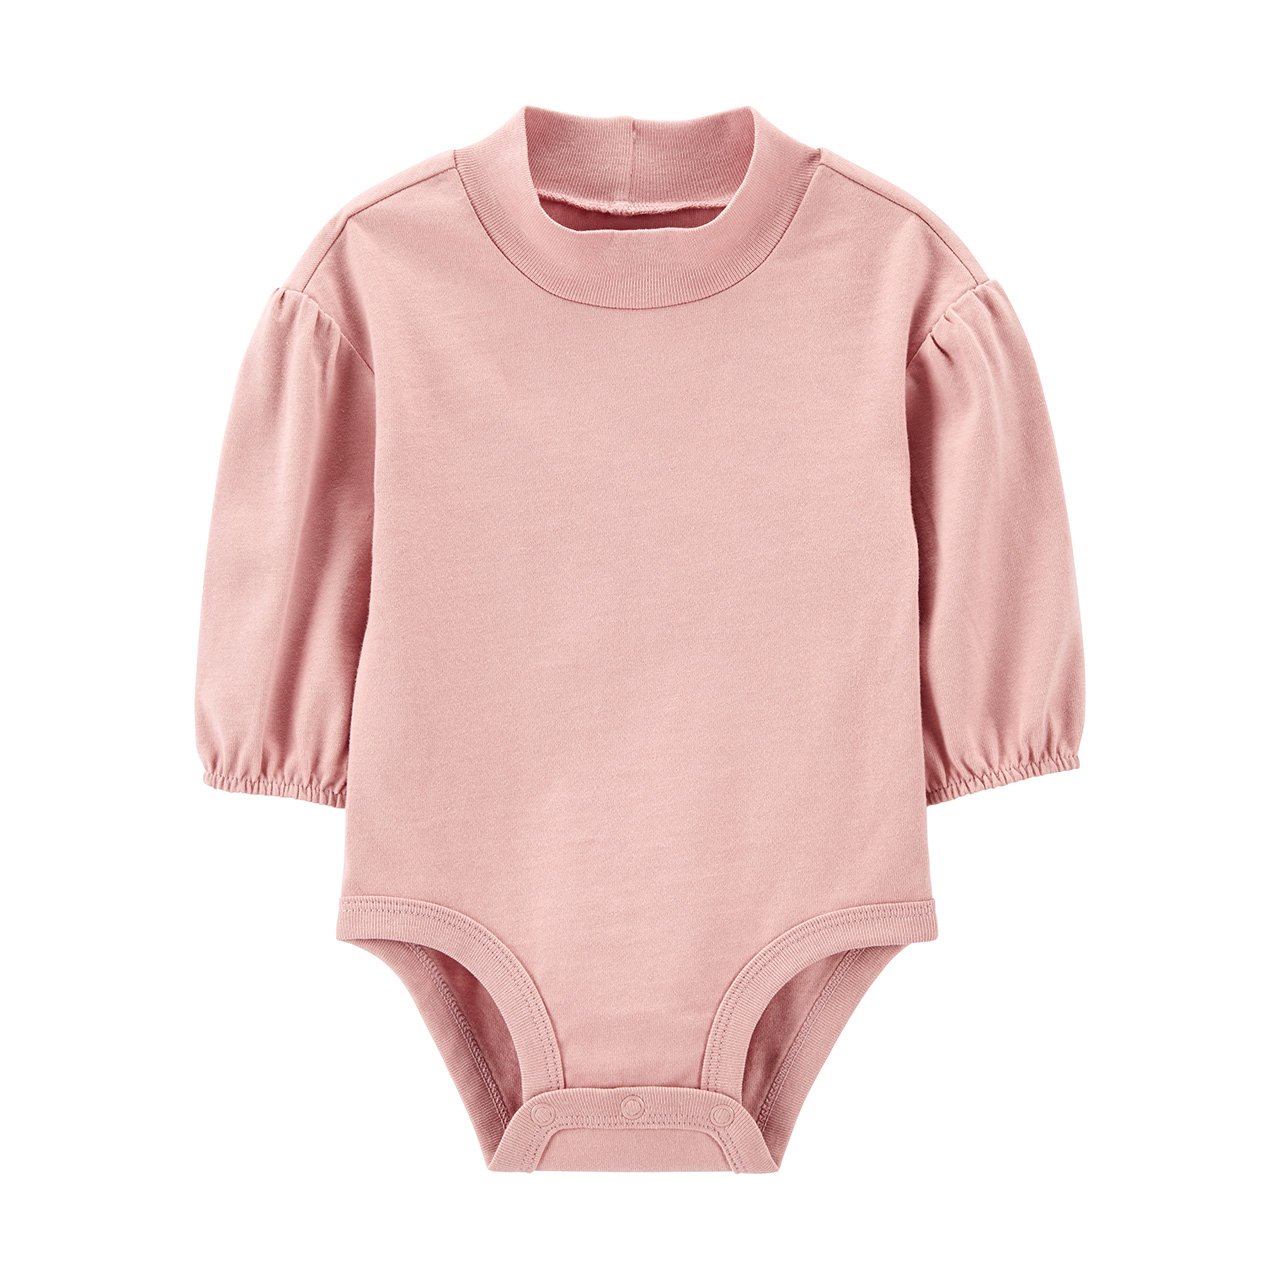 A soft pink bodysuit for babies.